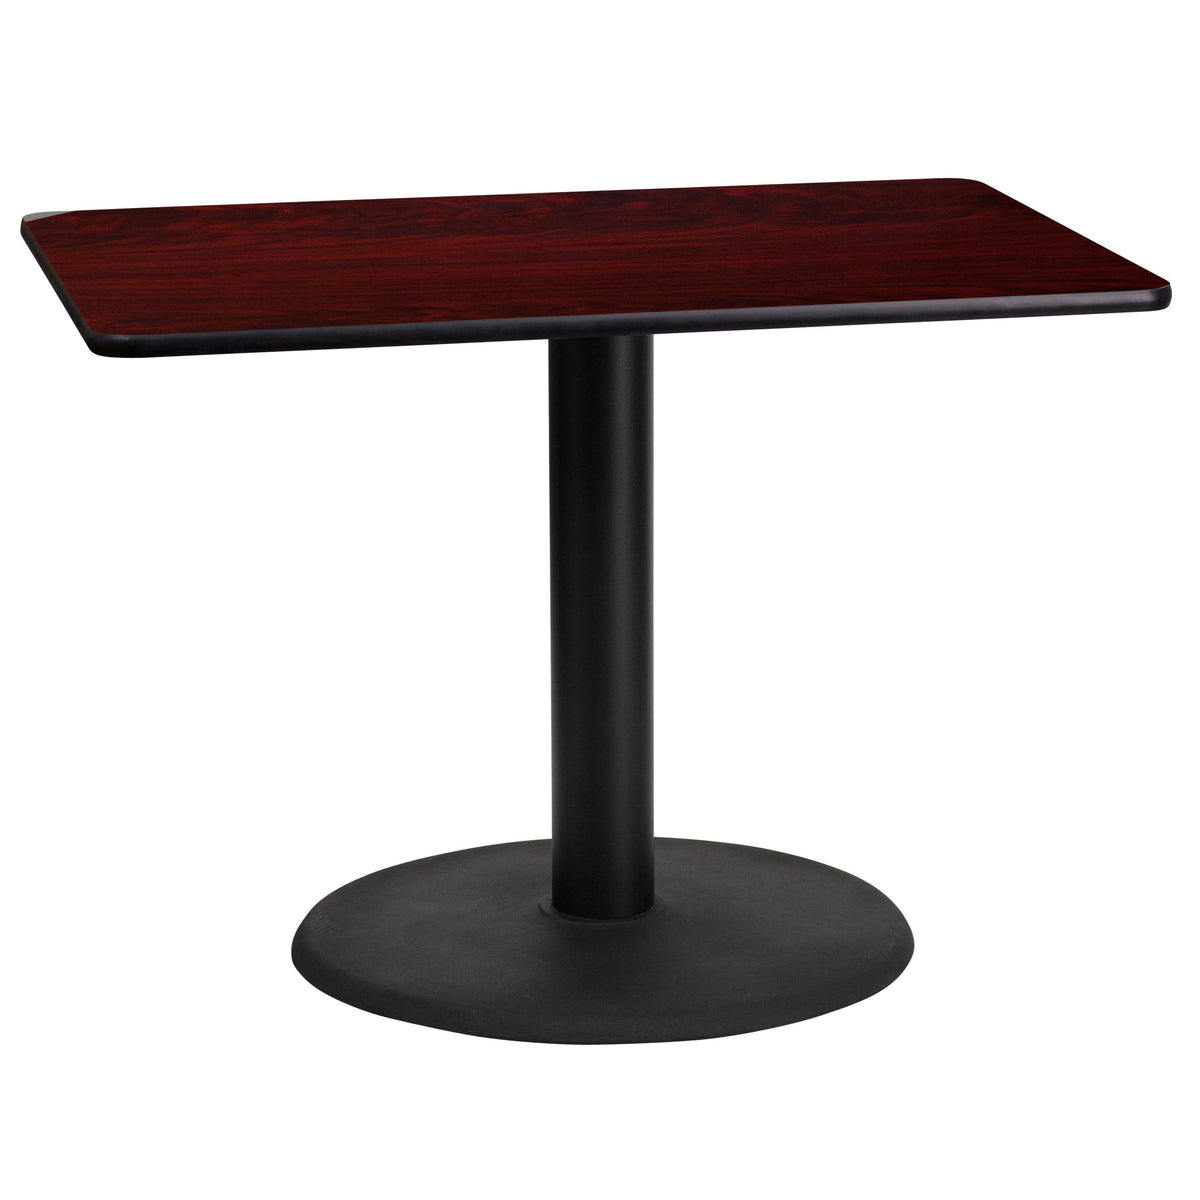 Mahogany |#| 24inch x 42inch Mahogany Laminate Table Top with 24inch Round Table Height Base